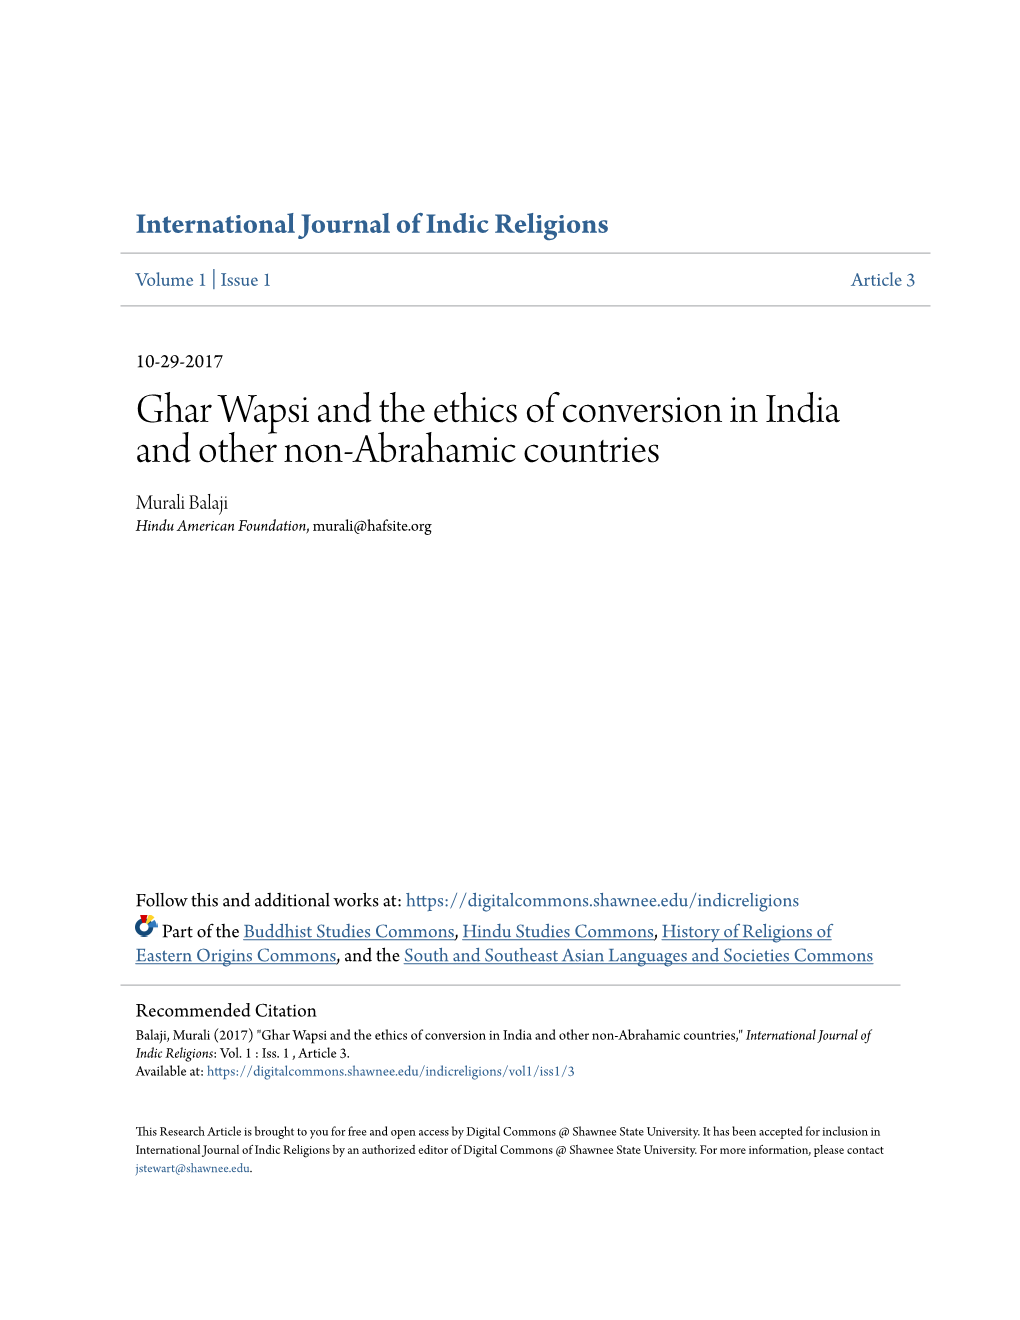 Ghar Wapsi and the Ethics of Conversion in India and Other Non-Abrahamic Countries Murali Balaji Hindu American Foundation, Murali@Hafsite.Org